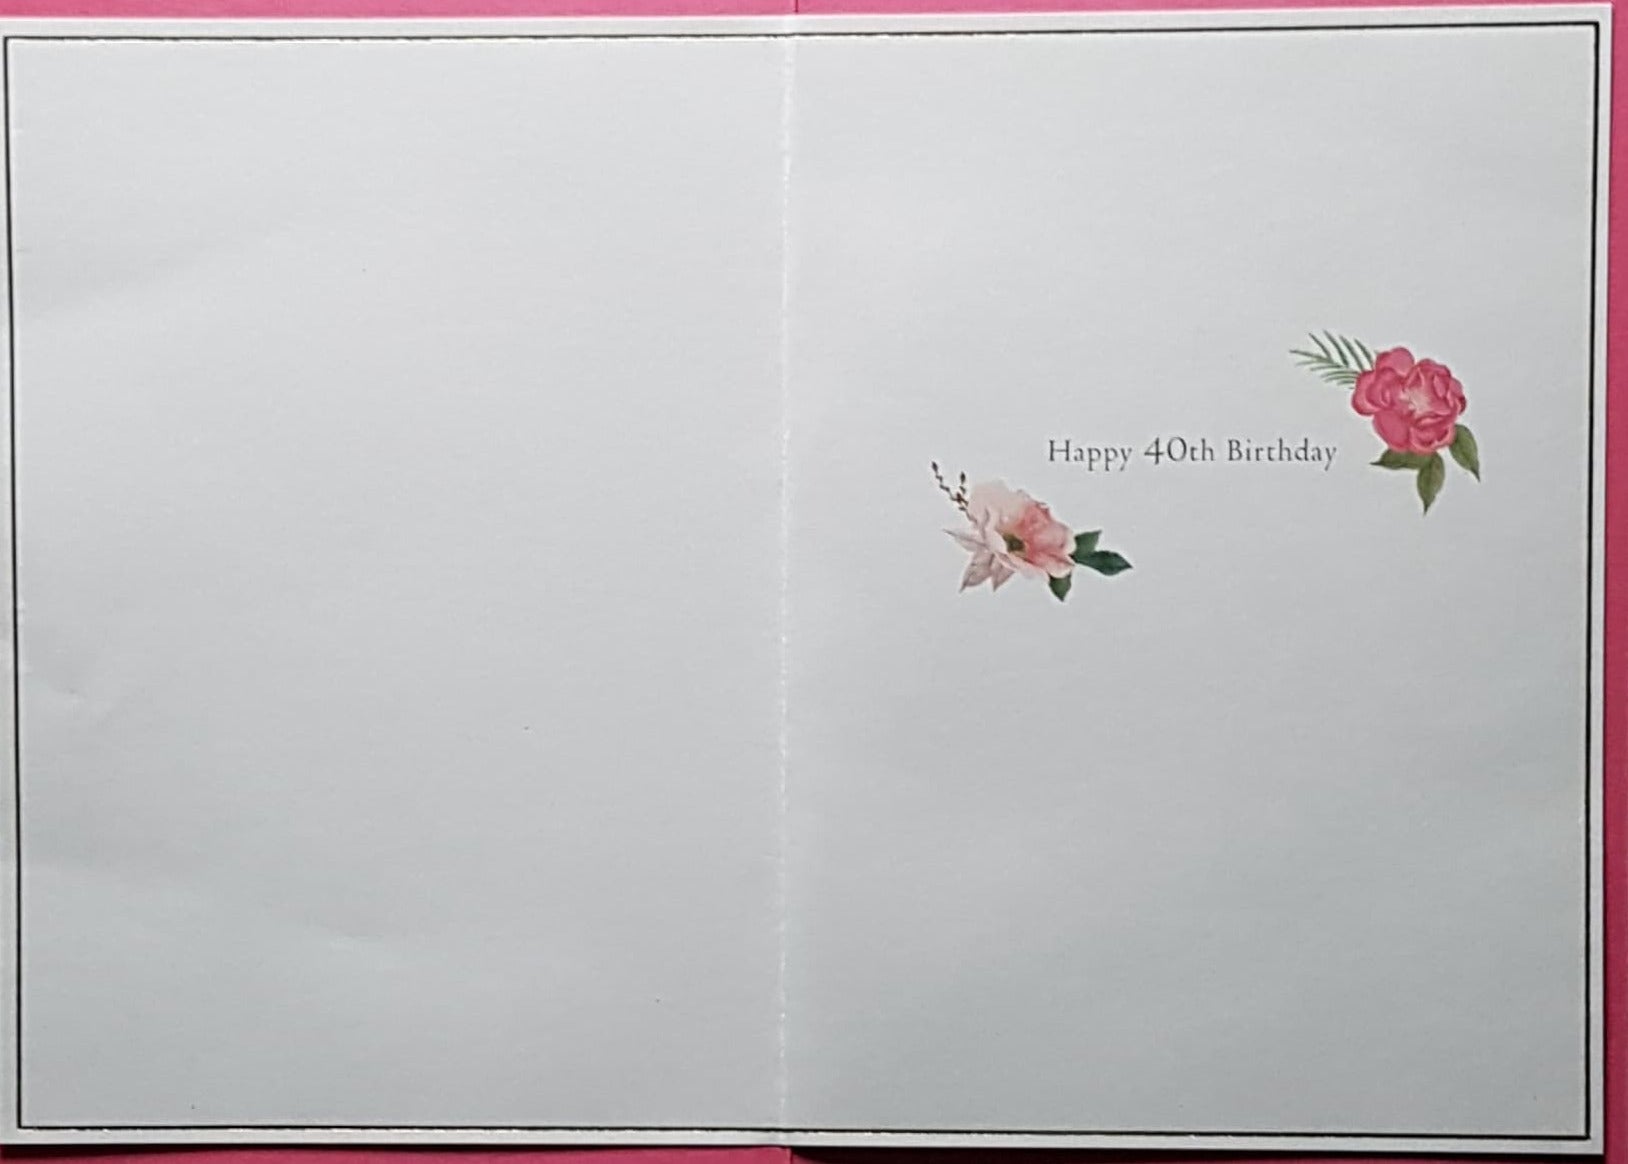 Age 40 Birthday Card - Pink Flowers  / Royal Horticultural Society